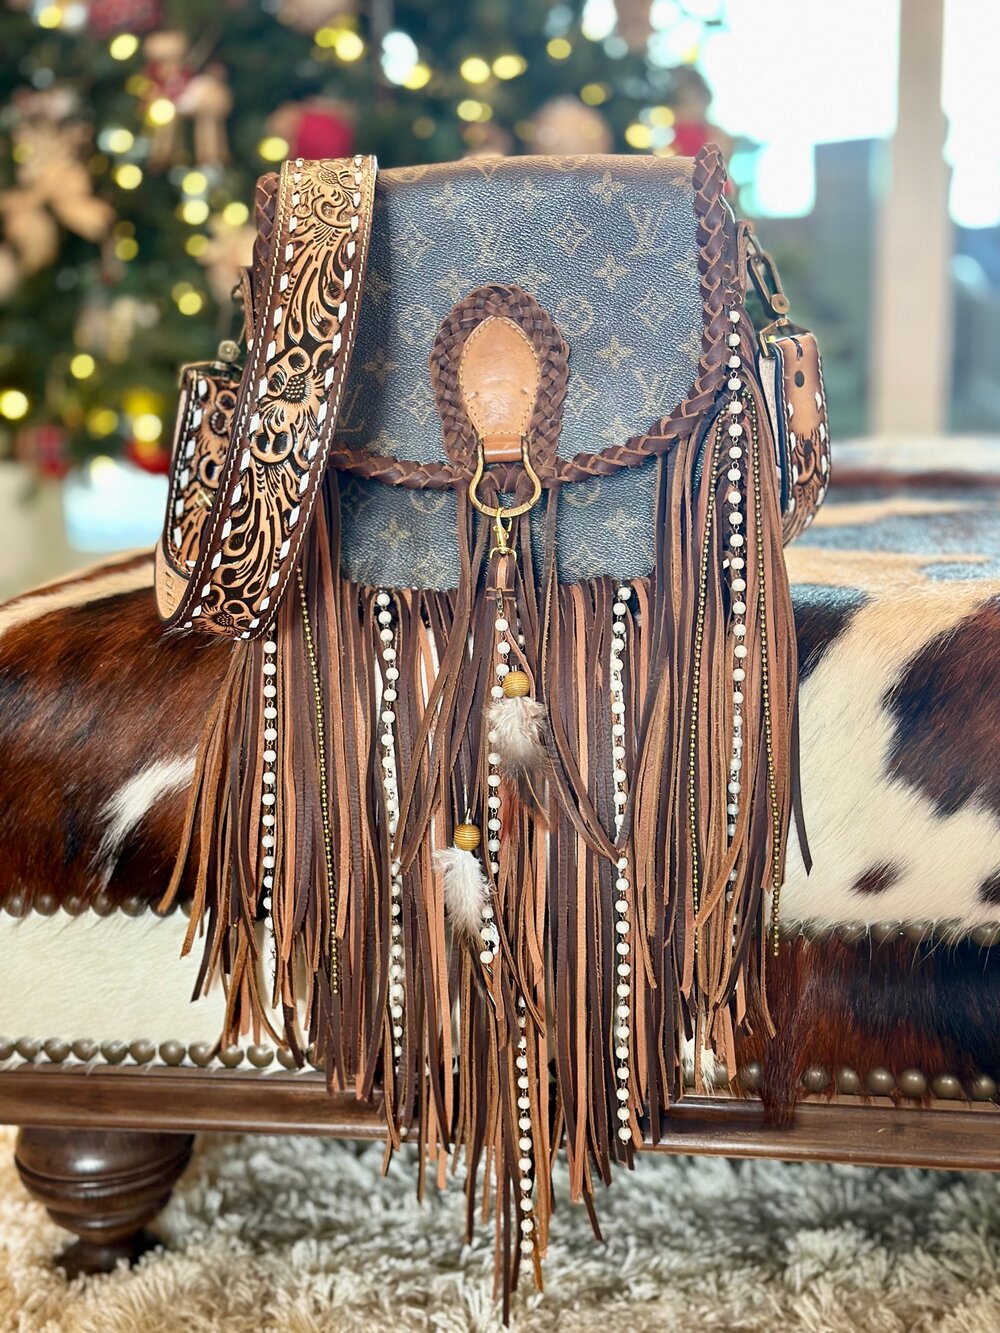 The Austin Bag Large Brown/Tan with Beads and Feathers — Classic